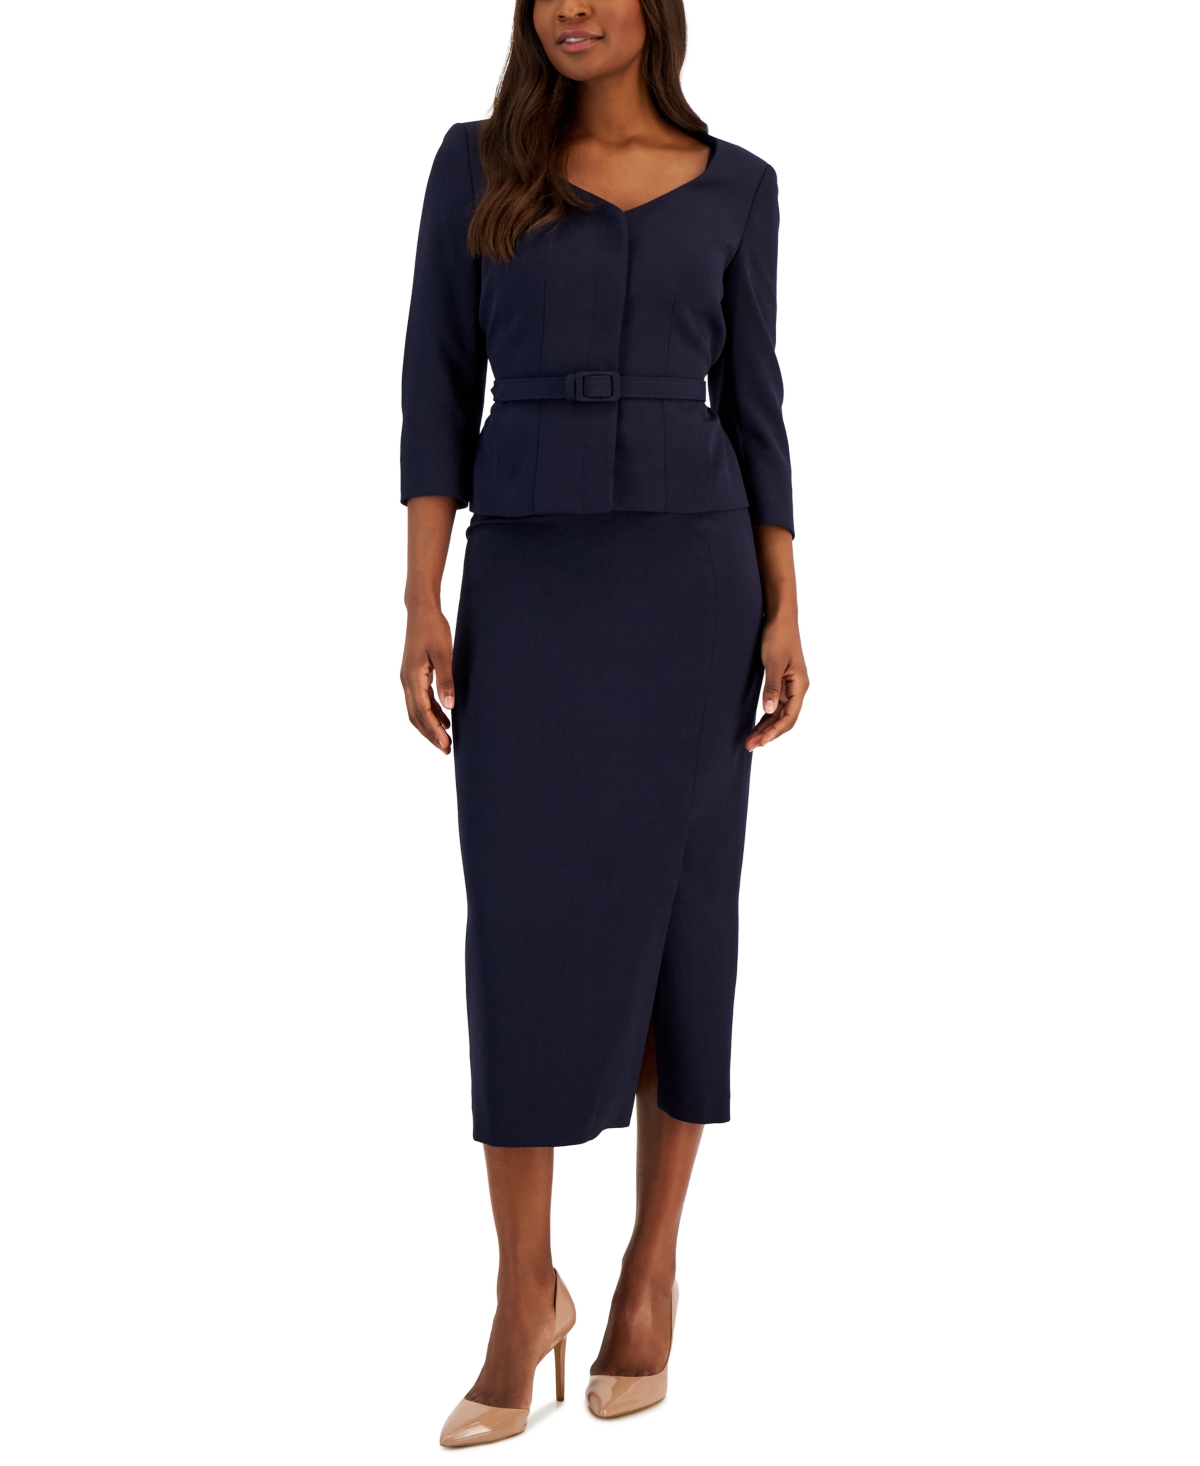 Le Suit Women's Belted Jacket 3/4-sleeve Skirt Suit In Navy